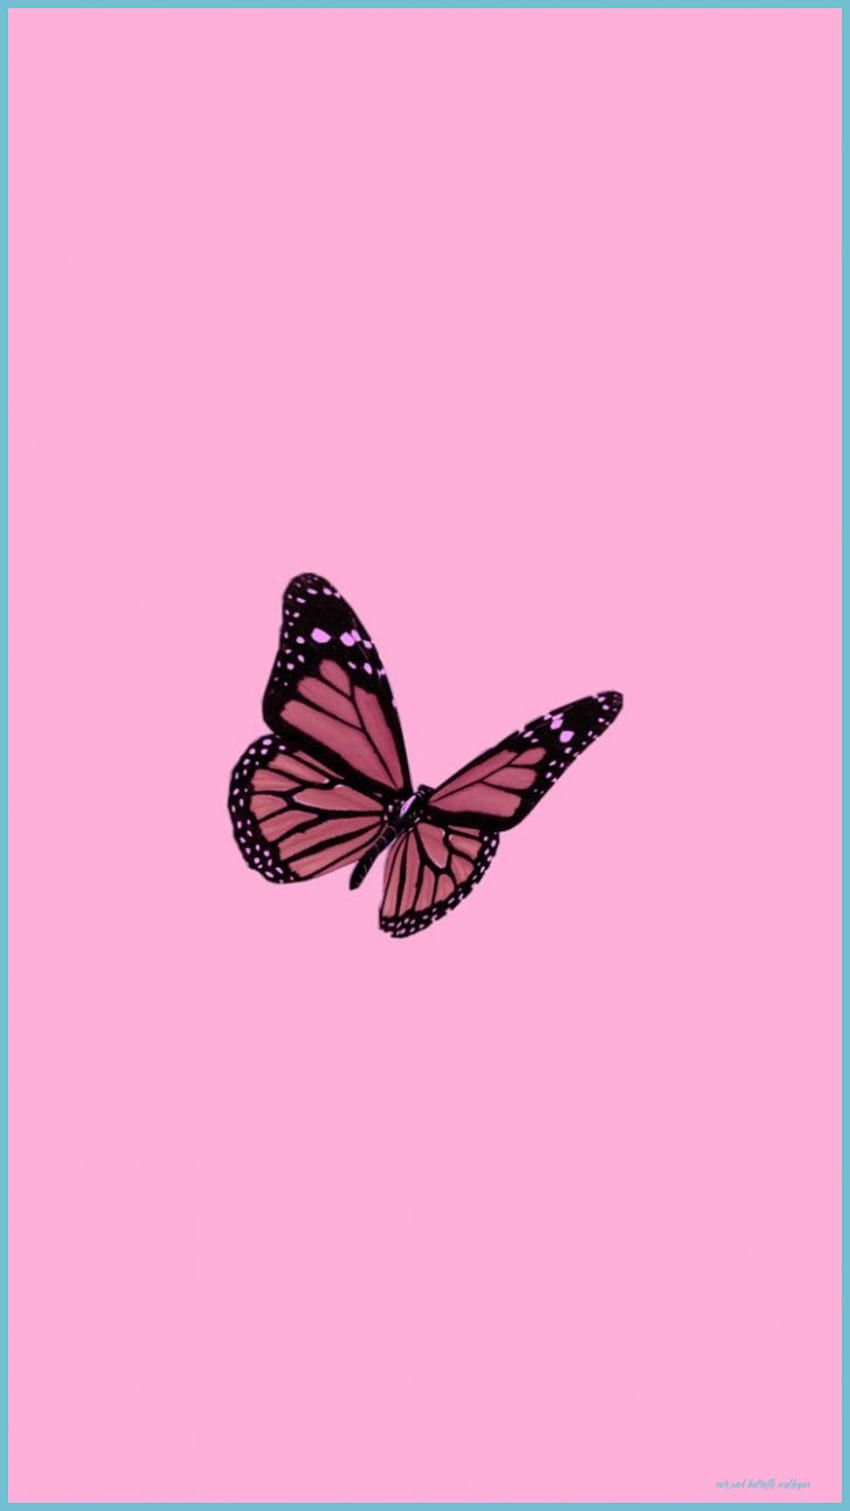 Incredible Compilation: Over 999 Pink Butterfly Image in Full 4K Resolution